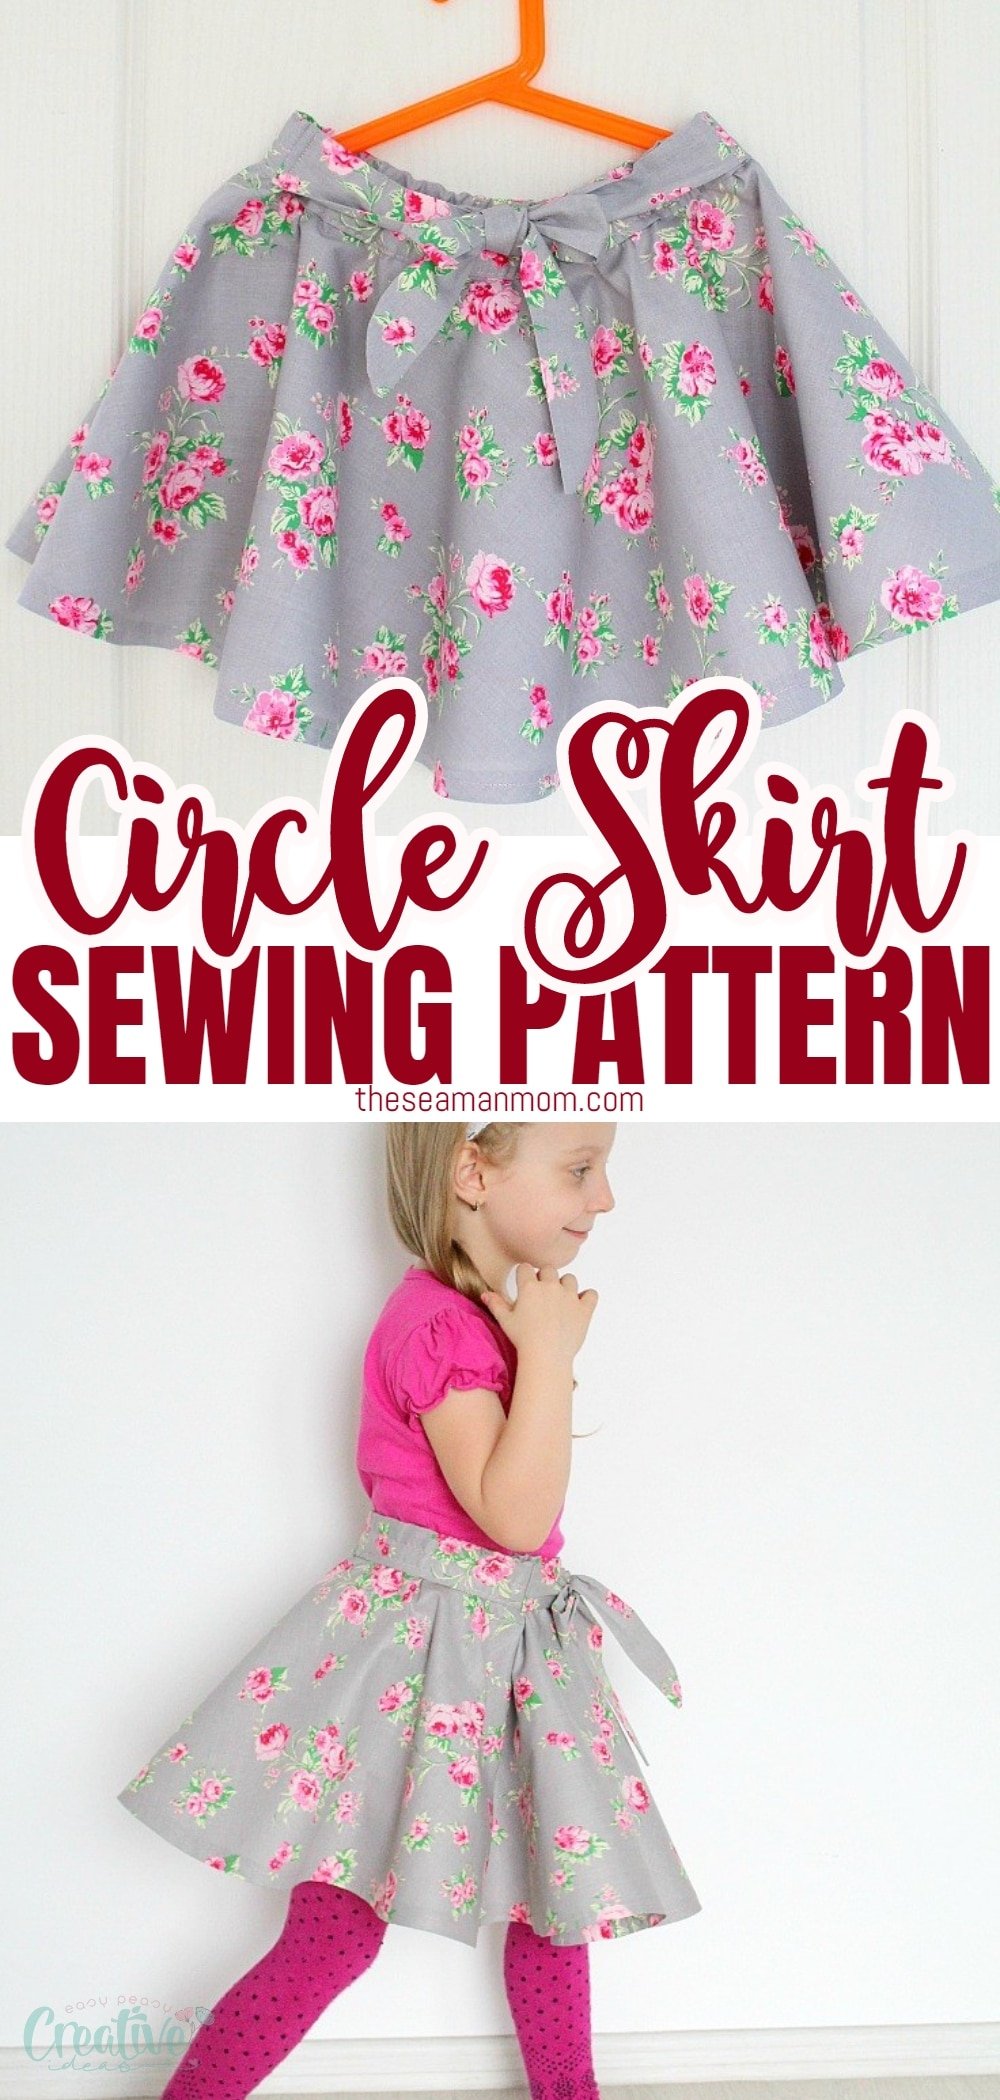 A circle skirt is a timeless piece that can be dressed up or down, making it a versatile addition to any wardrobe. And while circle skirts can be purchased ready-made, they're also relatively easy to make at home. All you need is a circle skirt pattern, some fabric, and an elastic waistband. Learn how to make your own with this easy to follow tutorial. via @petroneagu